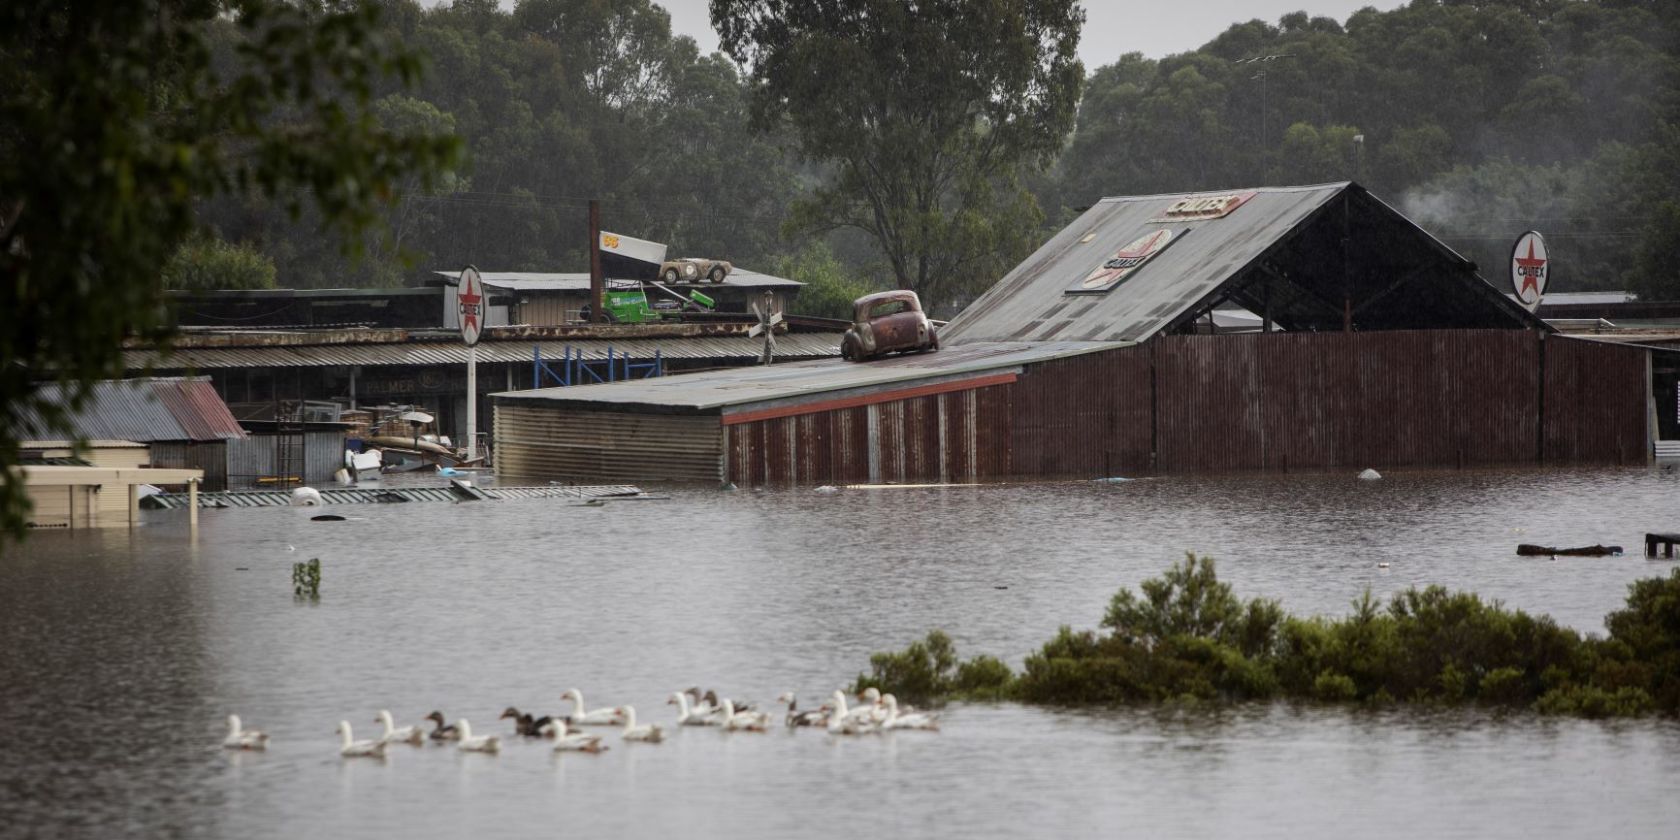 Stumped by Storms: Australians don’t know enough about storm season to protect themselves